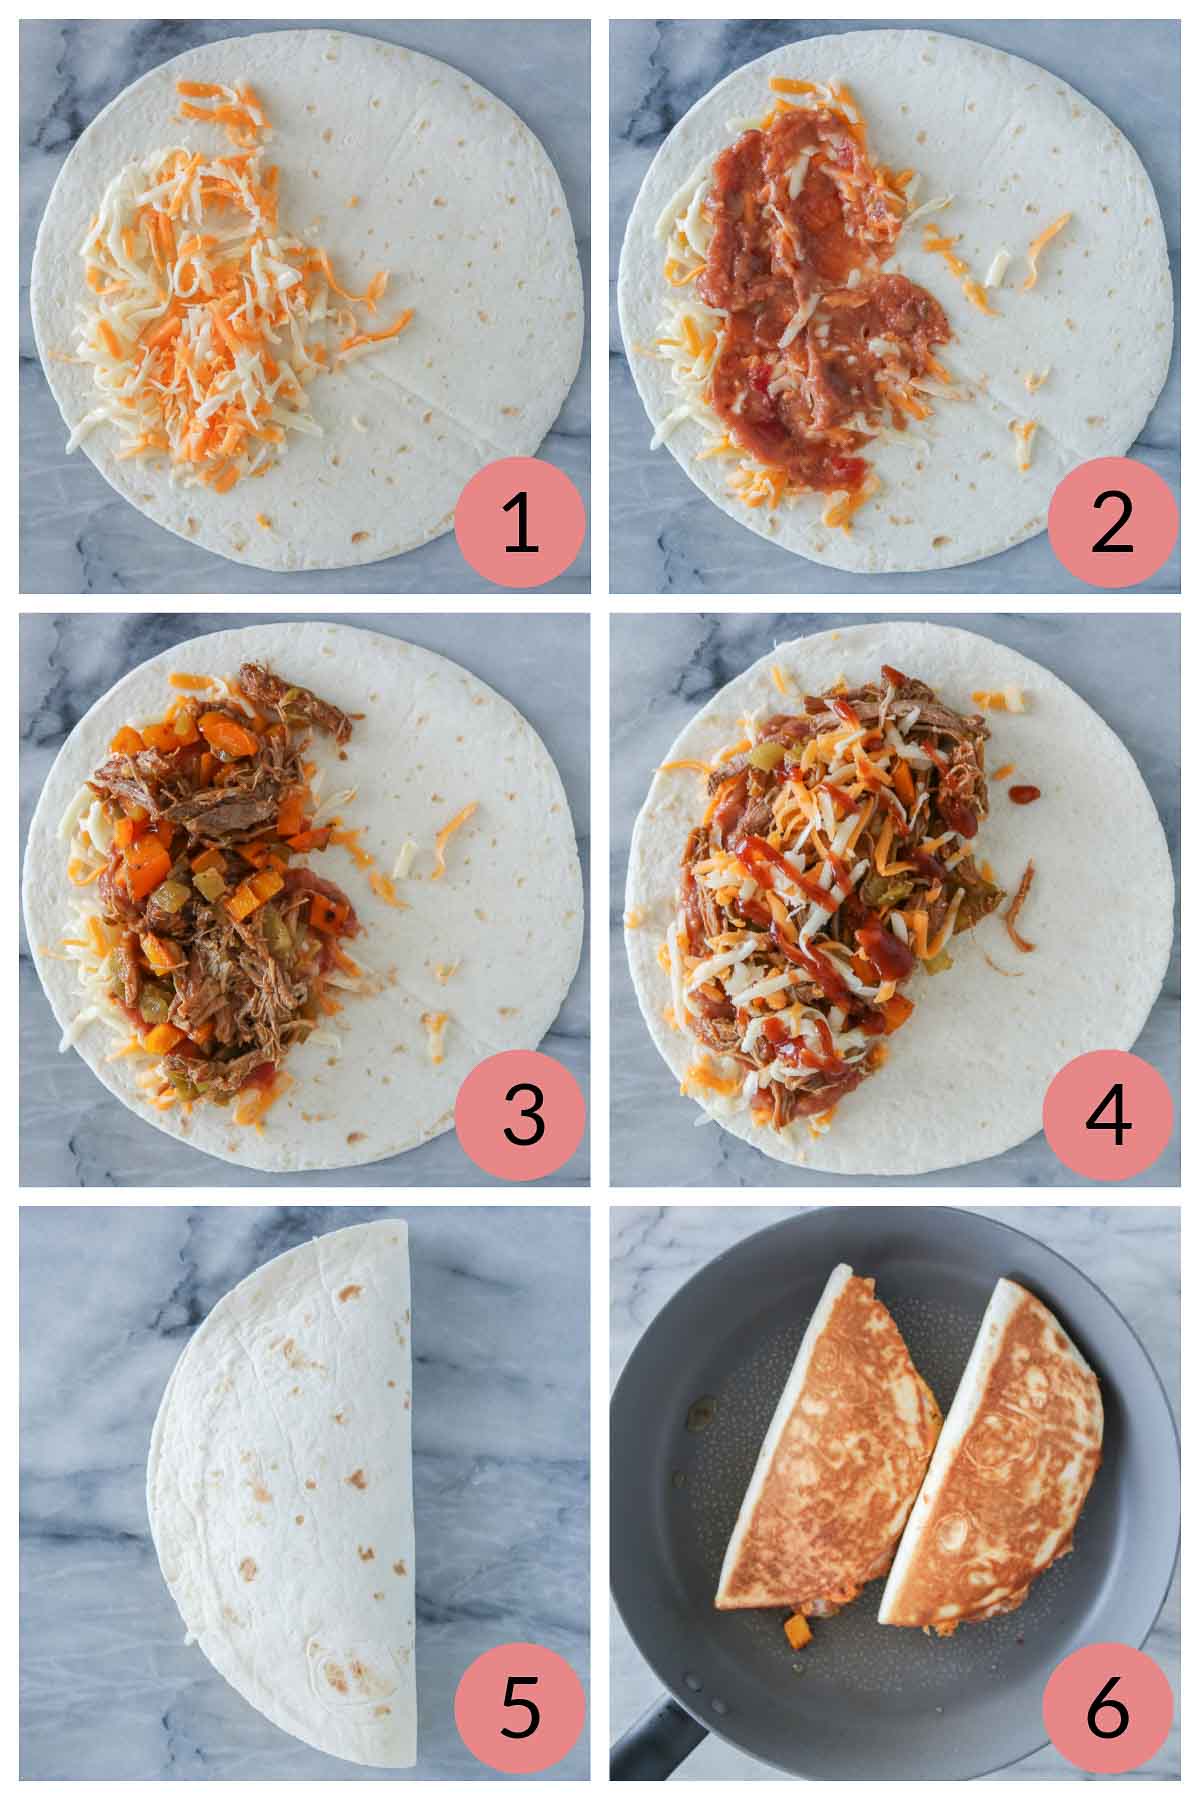 Collage of steps to assemble and pan fry pulled pork quesadillas.